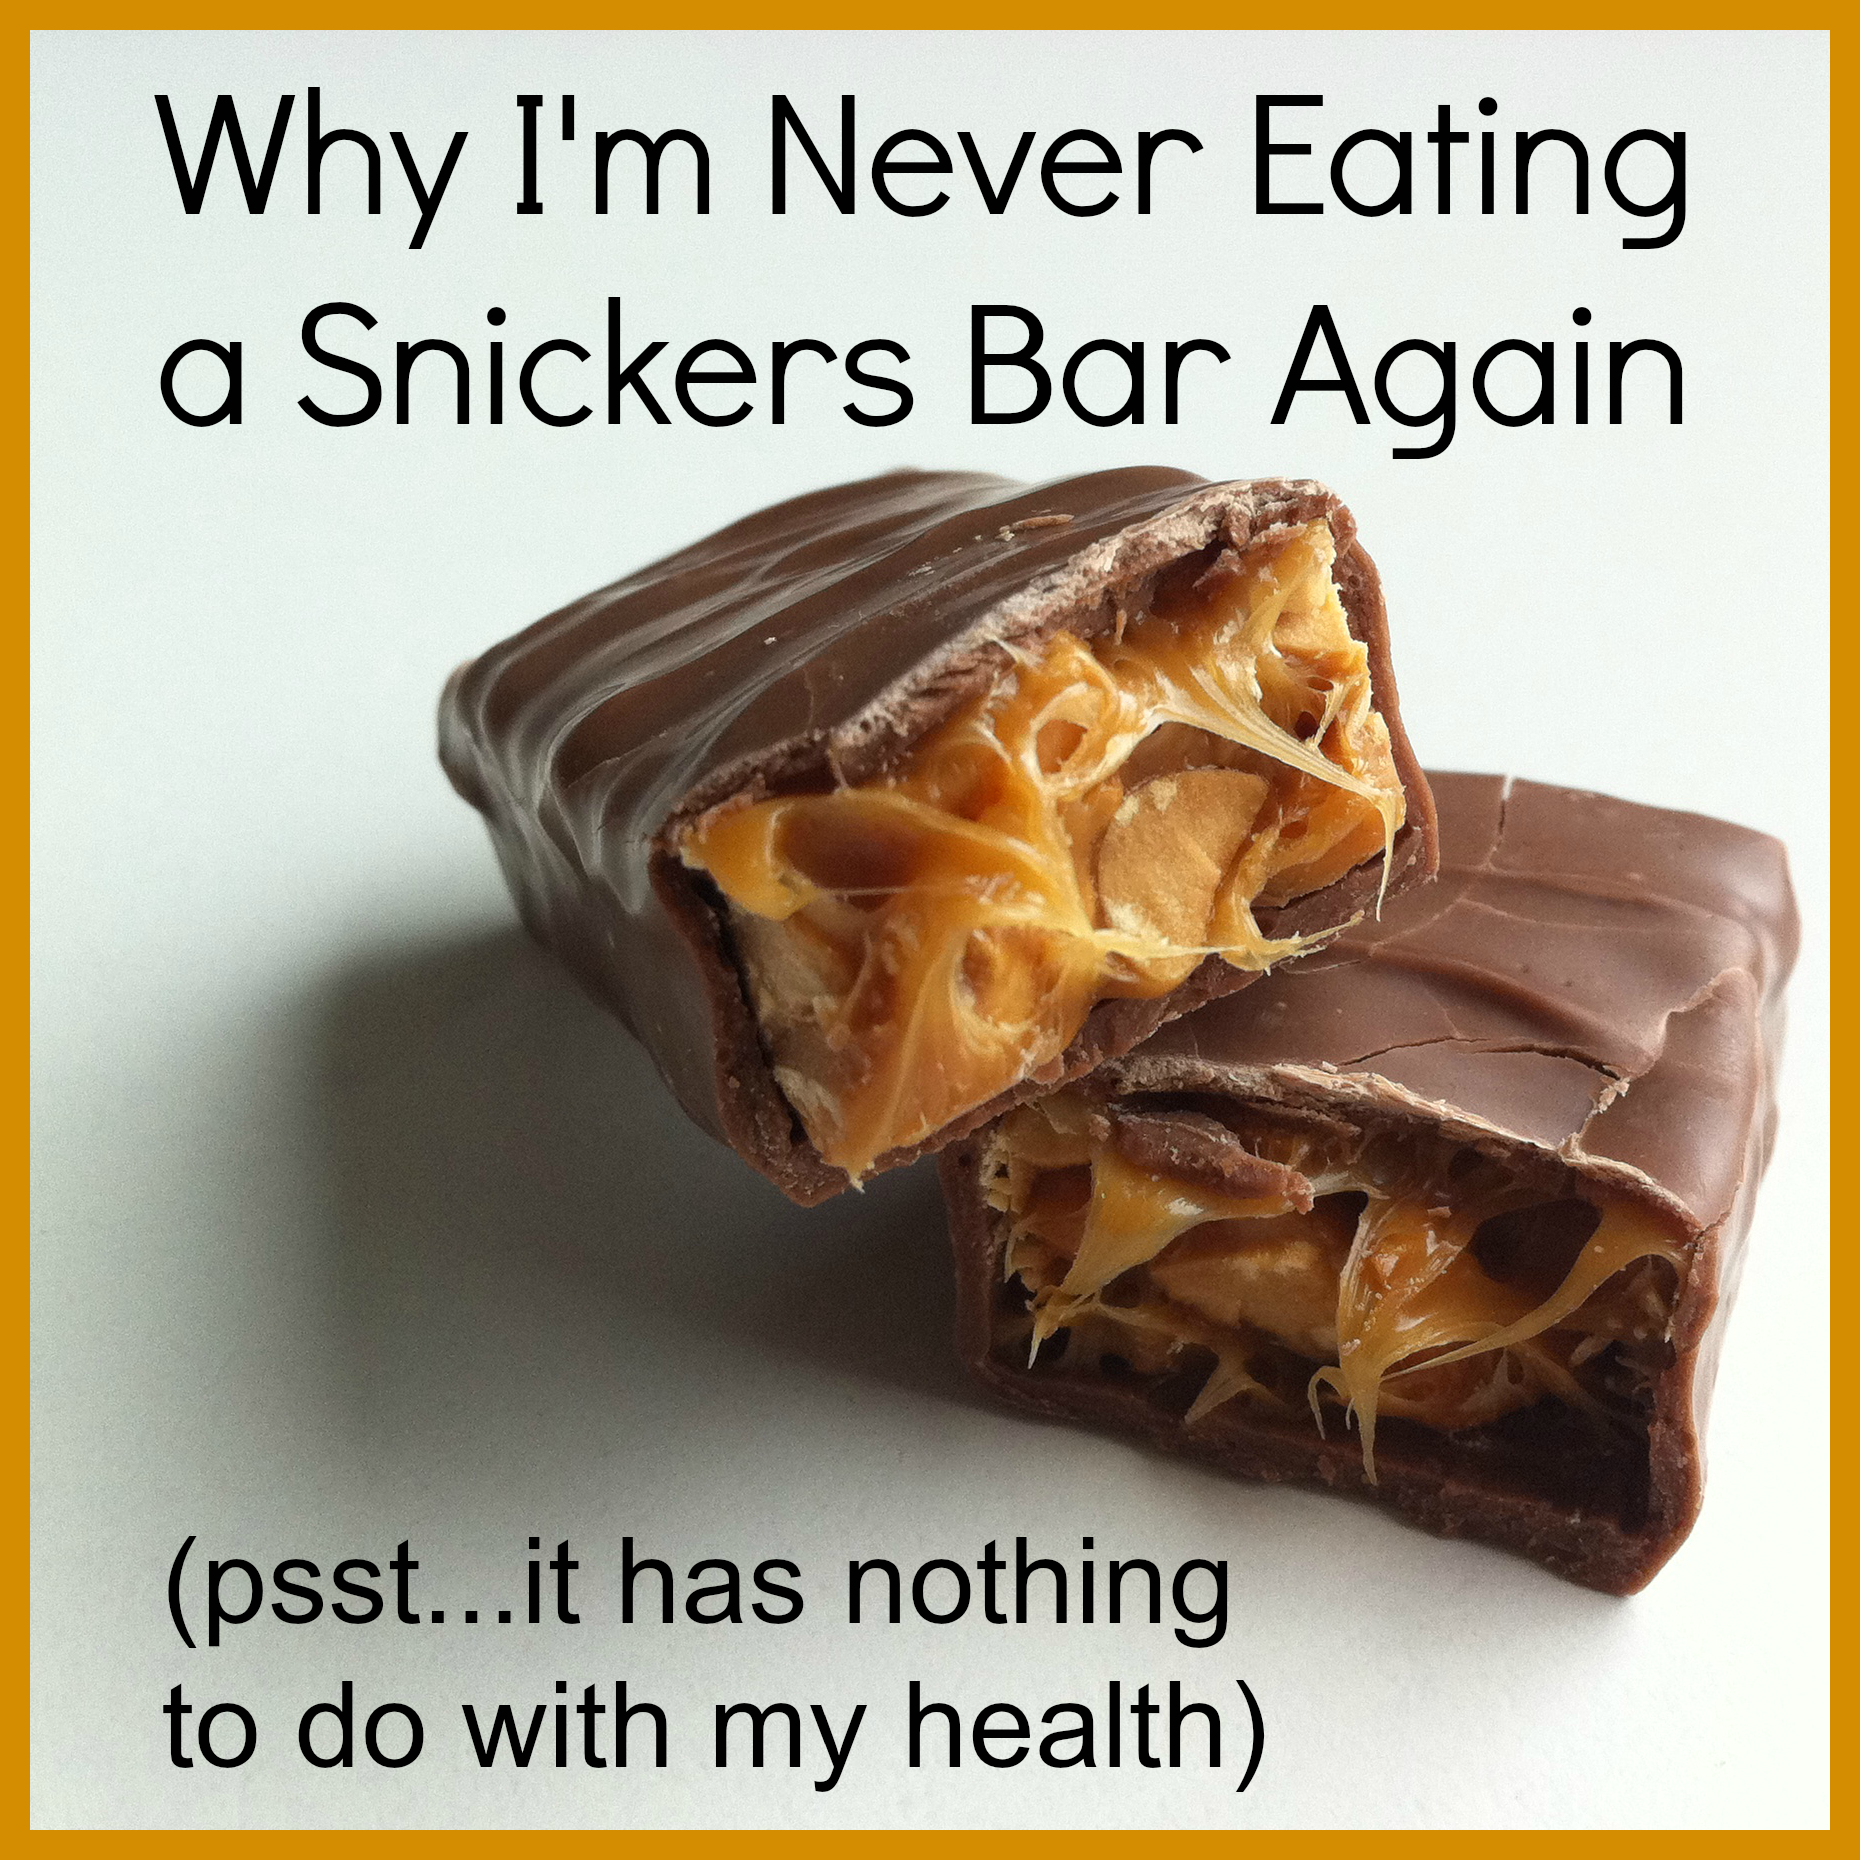 Why I'm Never Eating a Snickers Bar Again